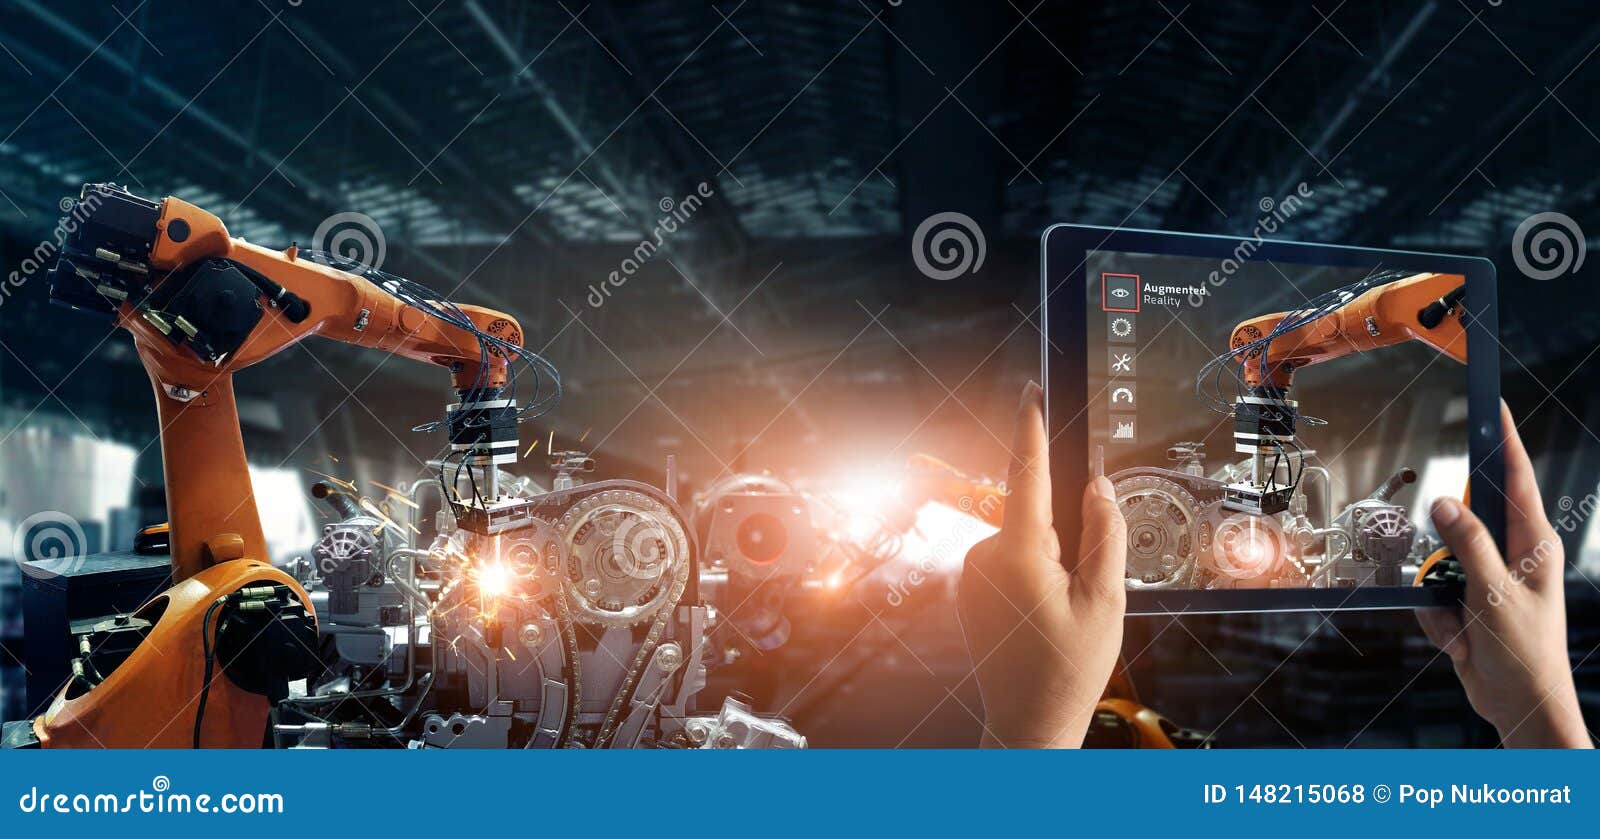 augmented reality industry concept. hand holding digital tablet use ar application to check and control welding robotics automatic